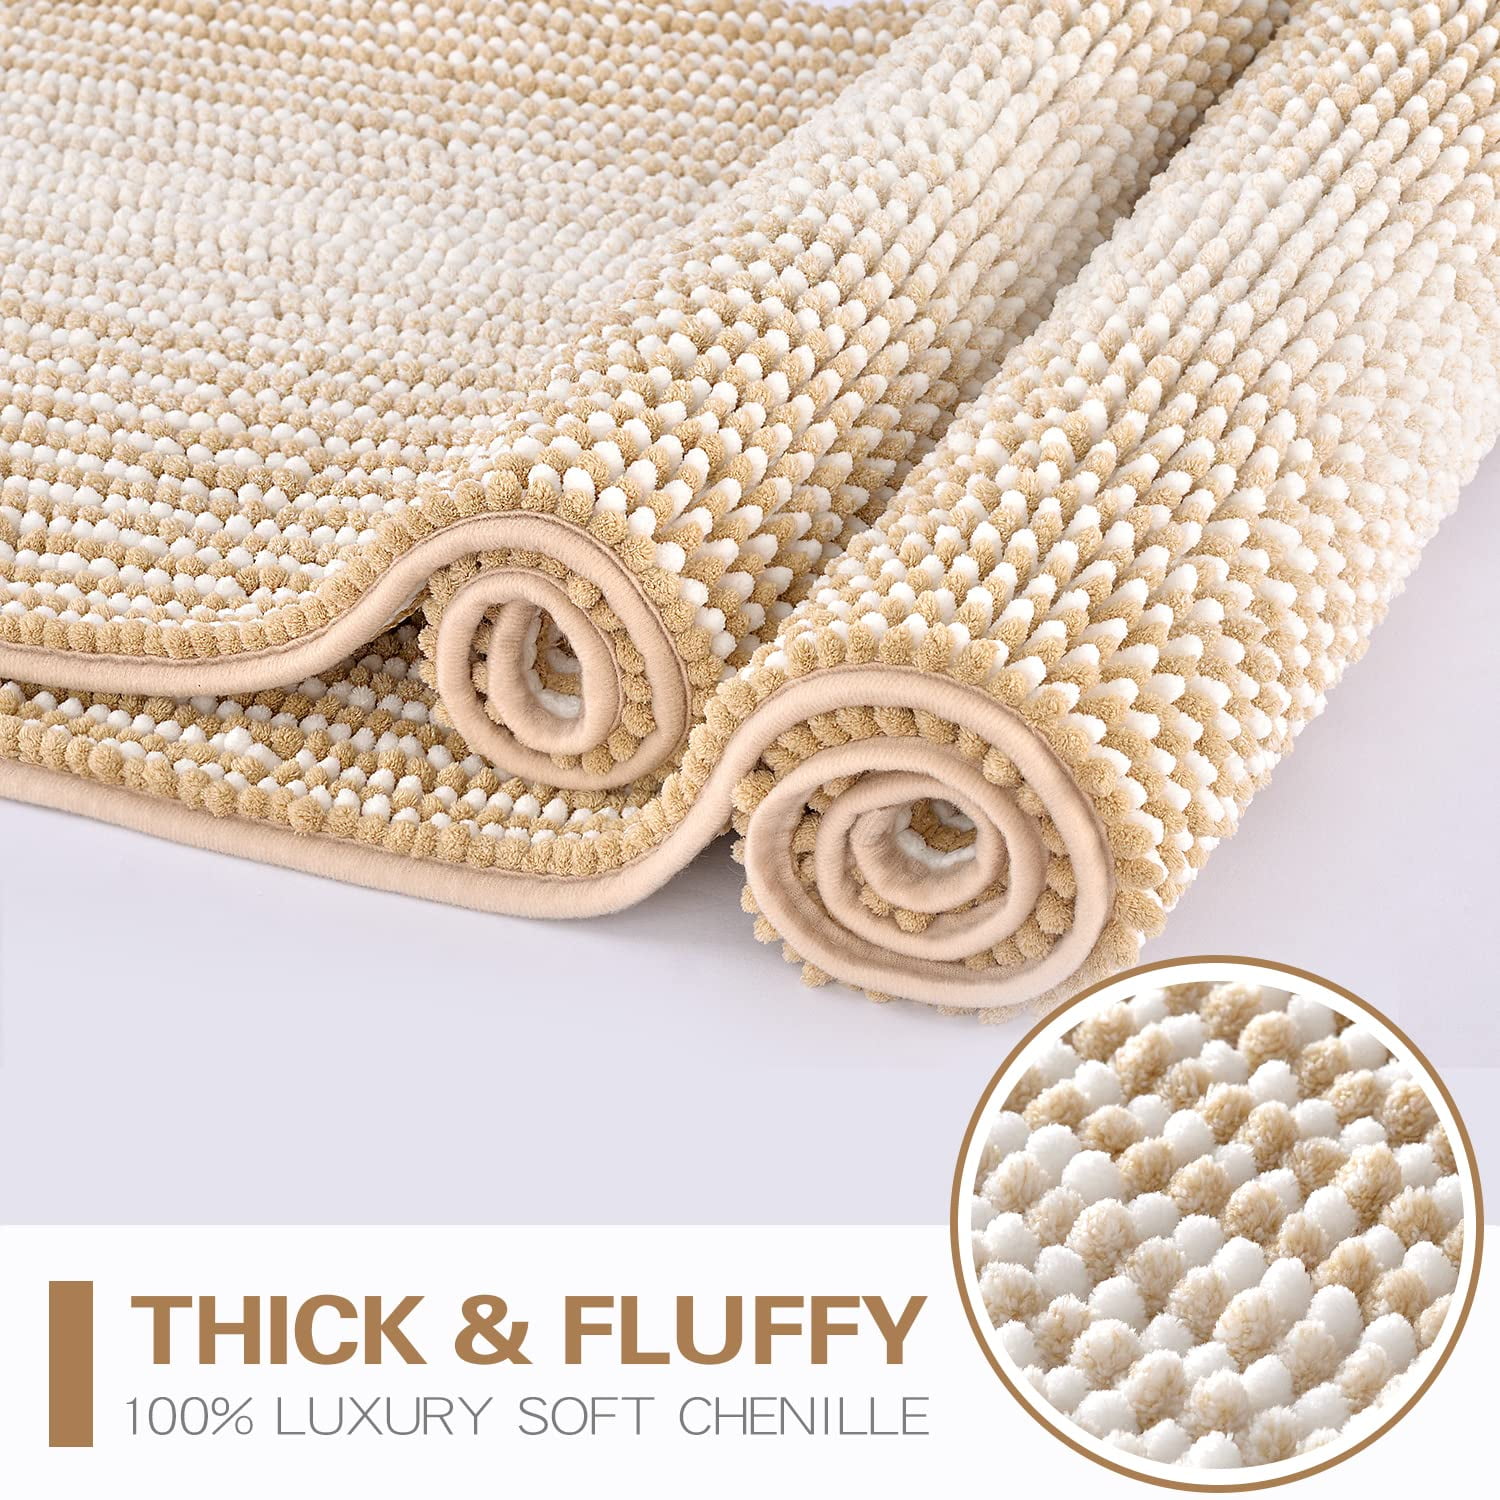 Feivea Luxury Soft Chenille Bath Rugs Sets 2 Piece Non Slip Shaggy Fluffy  Thick Microfiber Bathroom Mats Extra Absorbent Machine Washable（Asparagus